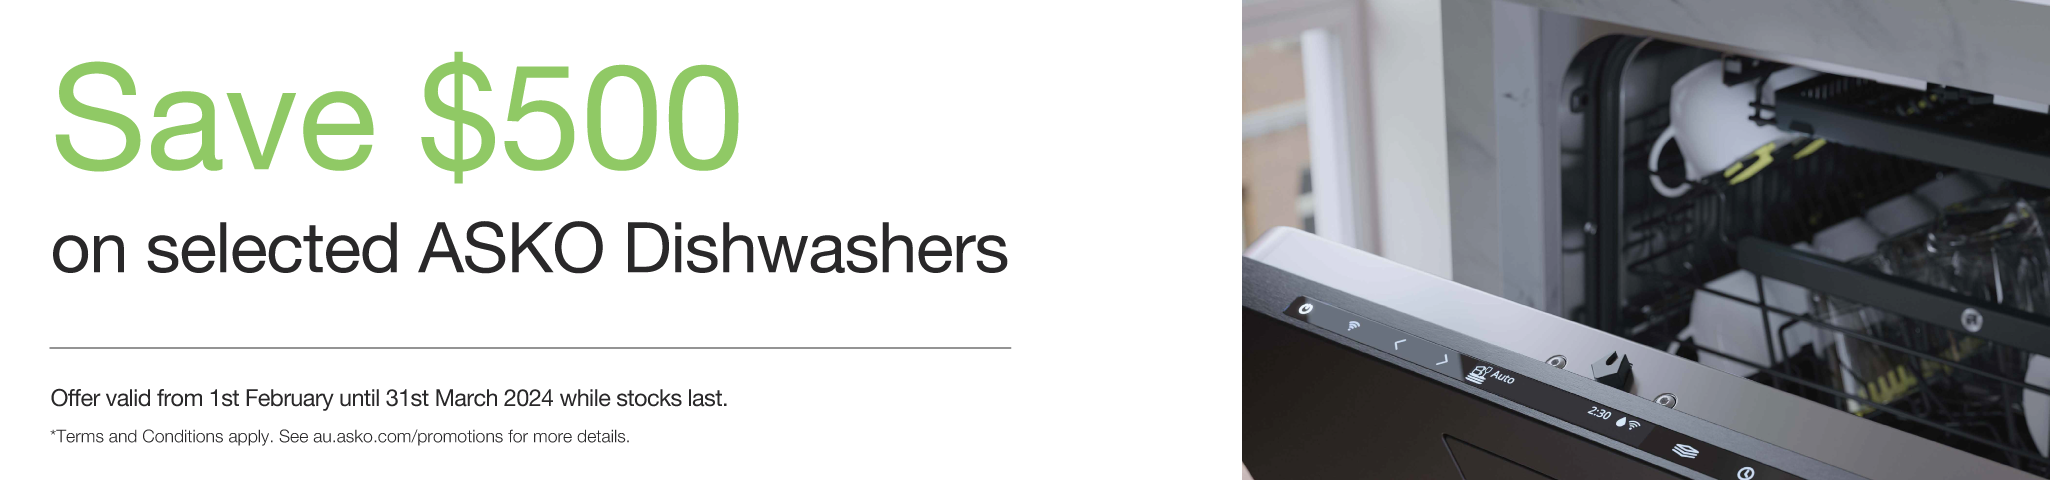 Save Up To $500* On Selected ASKO Dishwashers